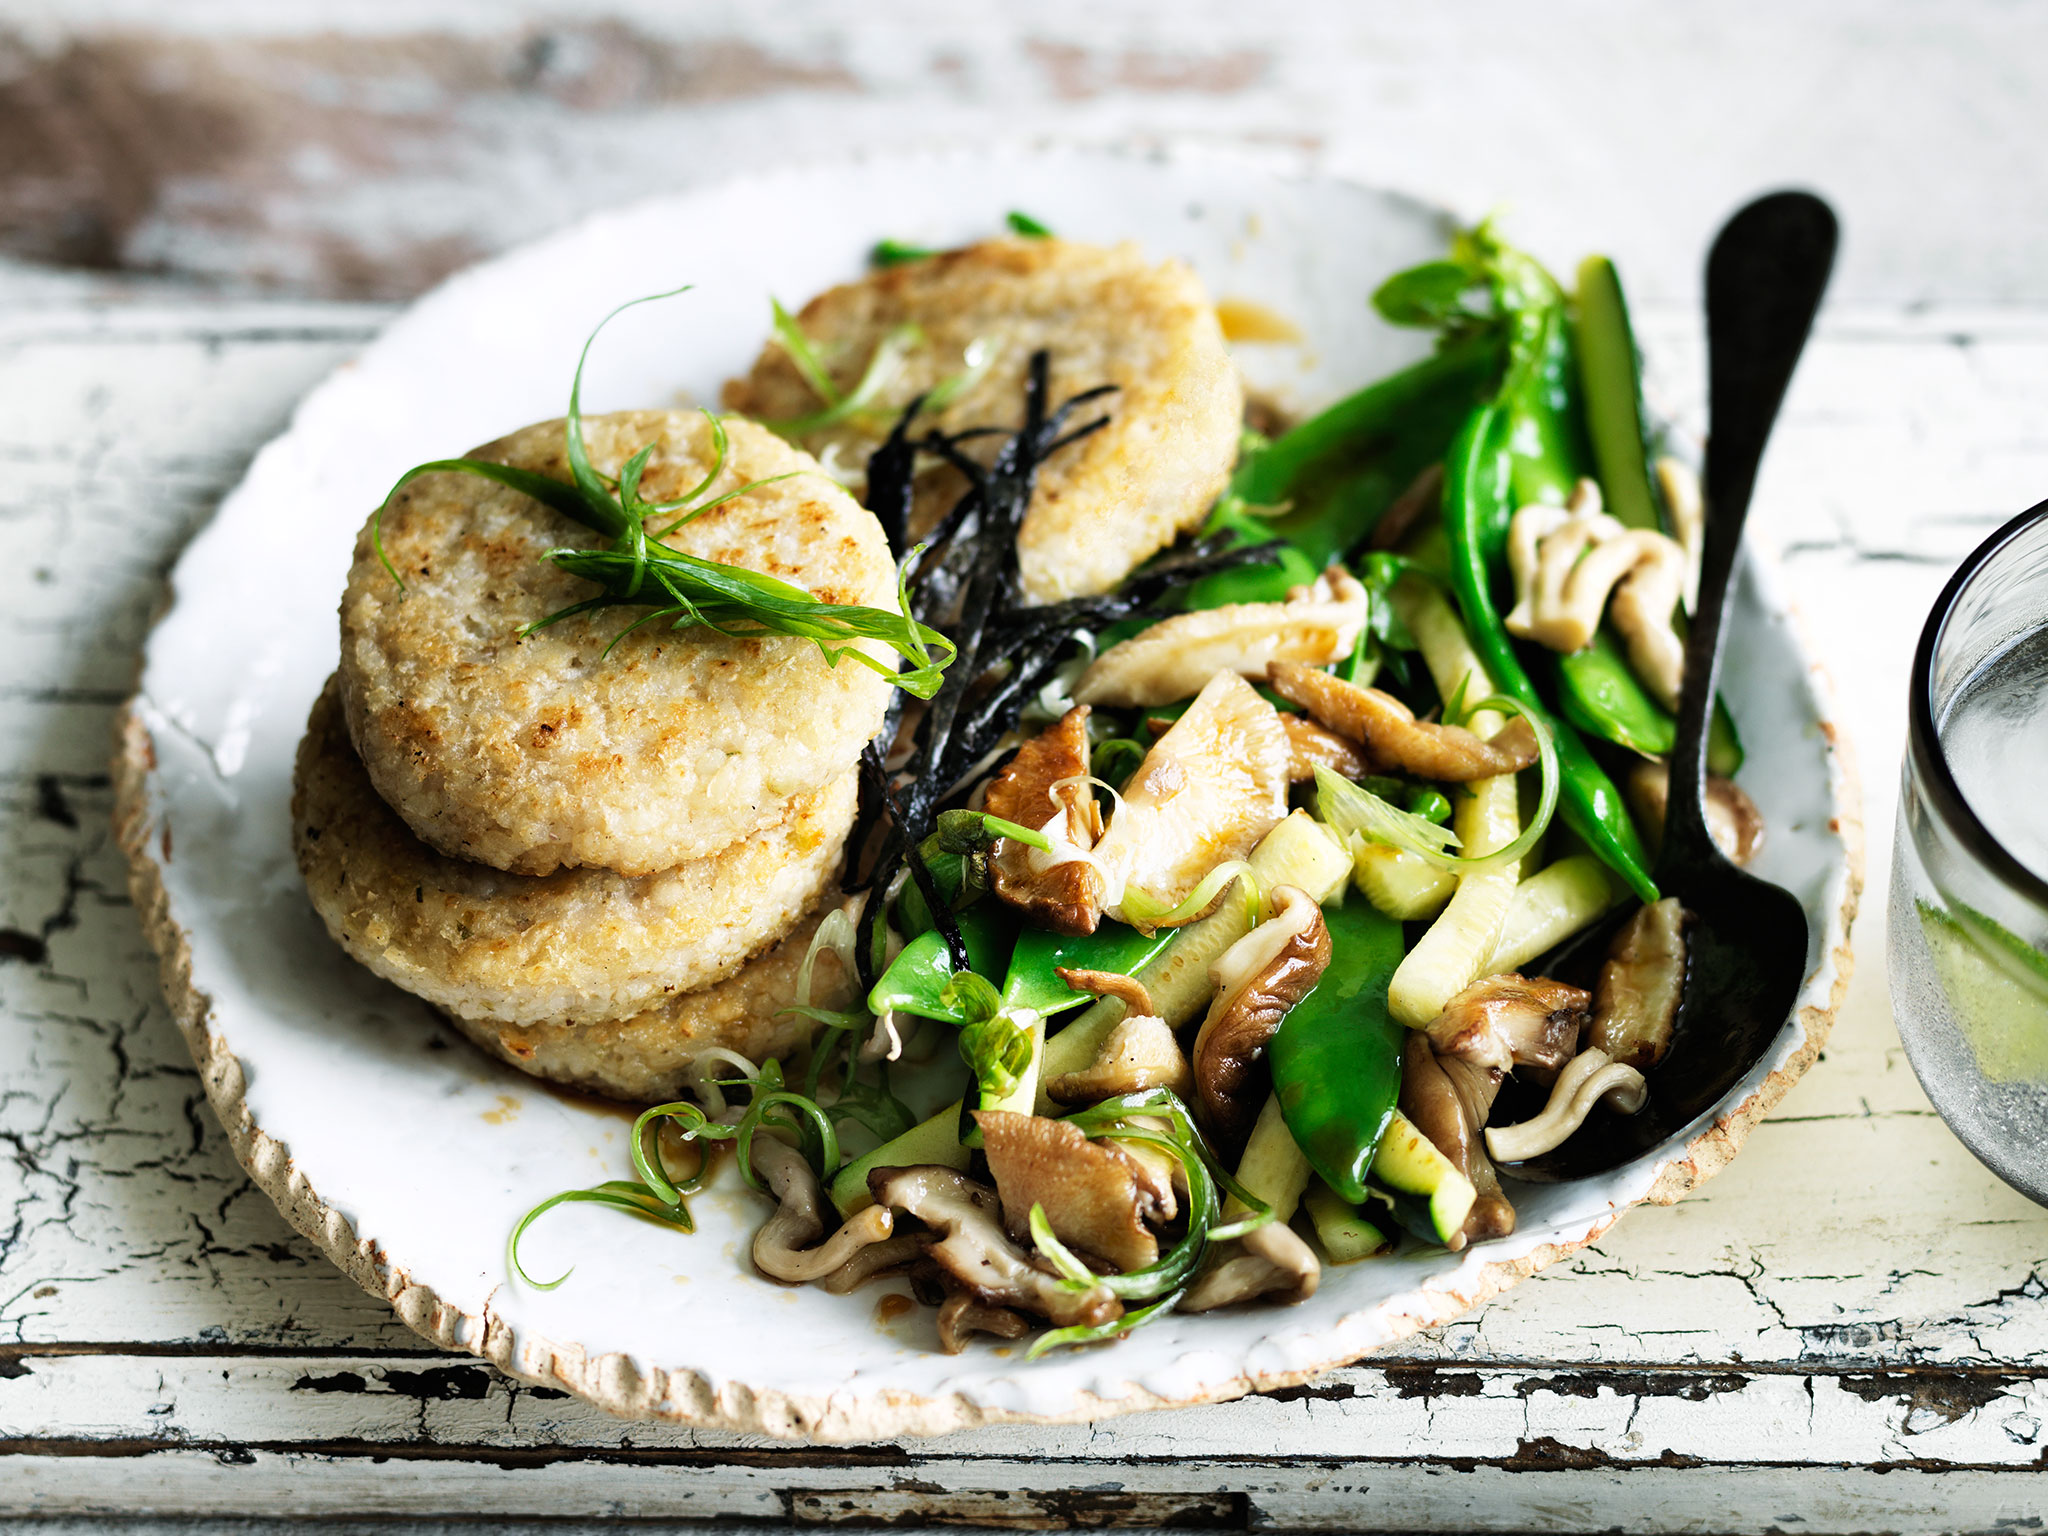 Rice cakes with zucchini and mushrooms